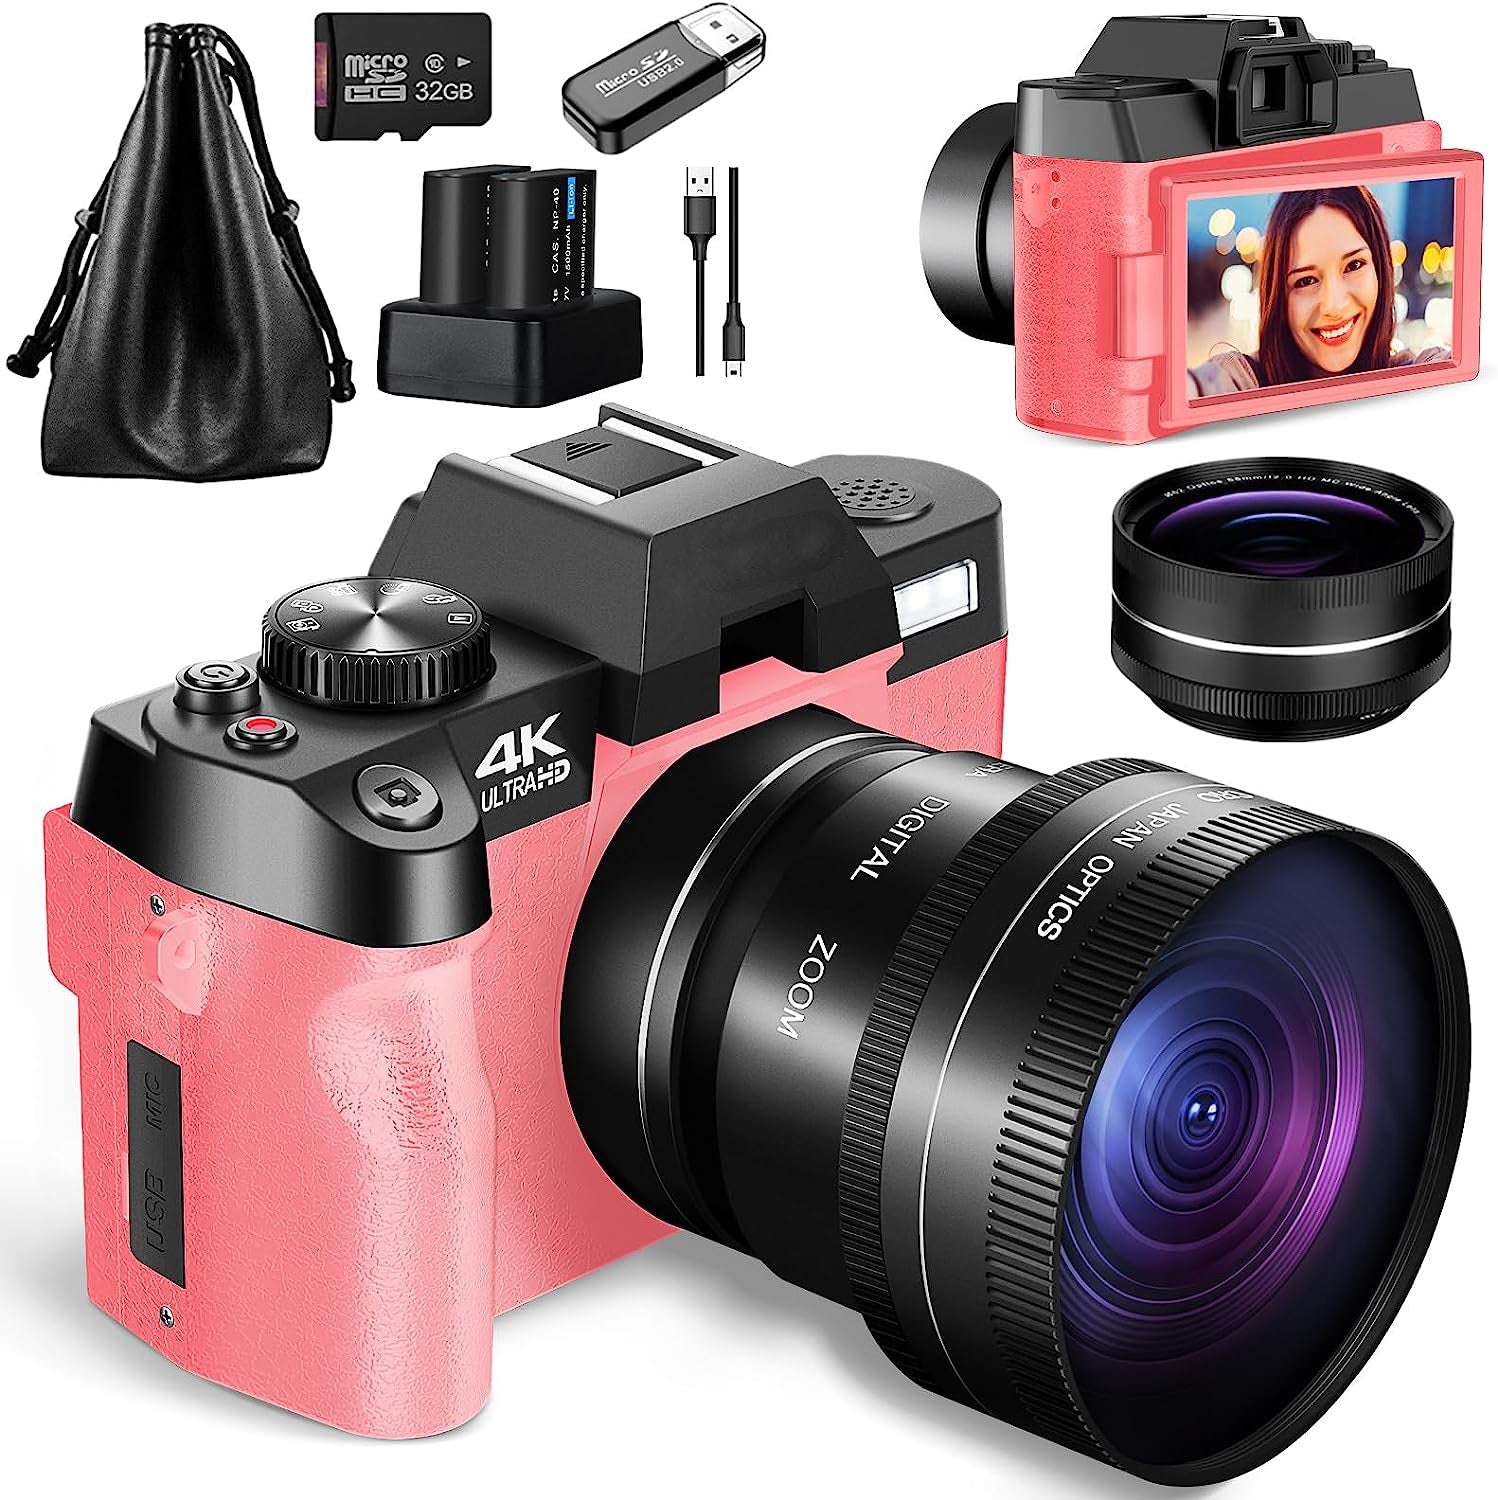 NBD Digital Camera 4K 48MP Vlogging Camera for  with WiFi and  Webcam,16x Digital Zoom Video Camera with Wide-Angle & Macro Lens